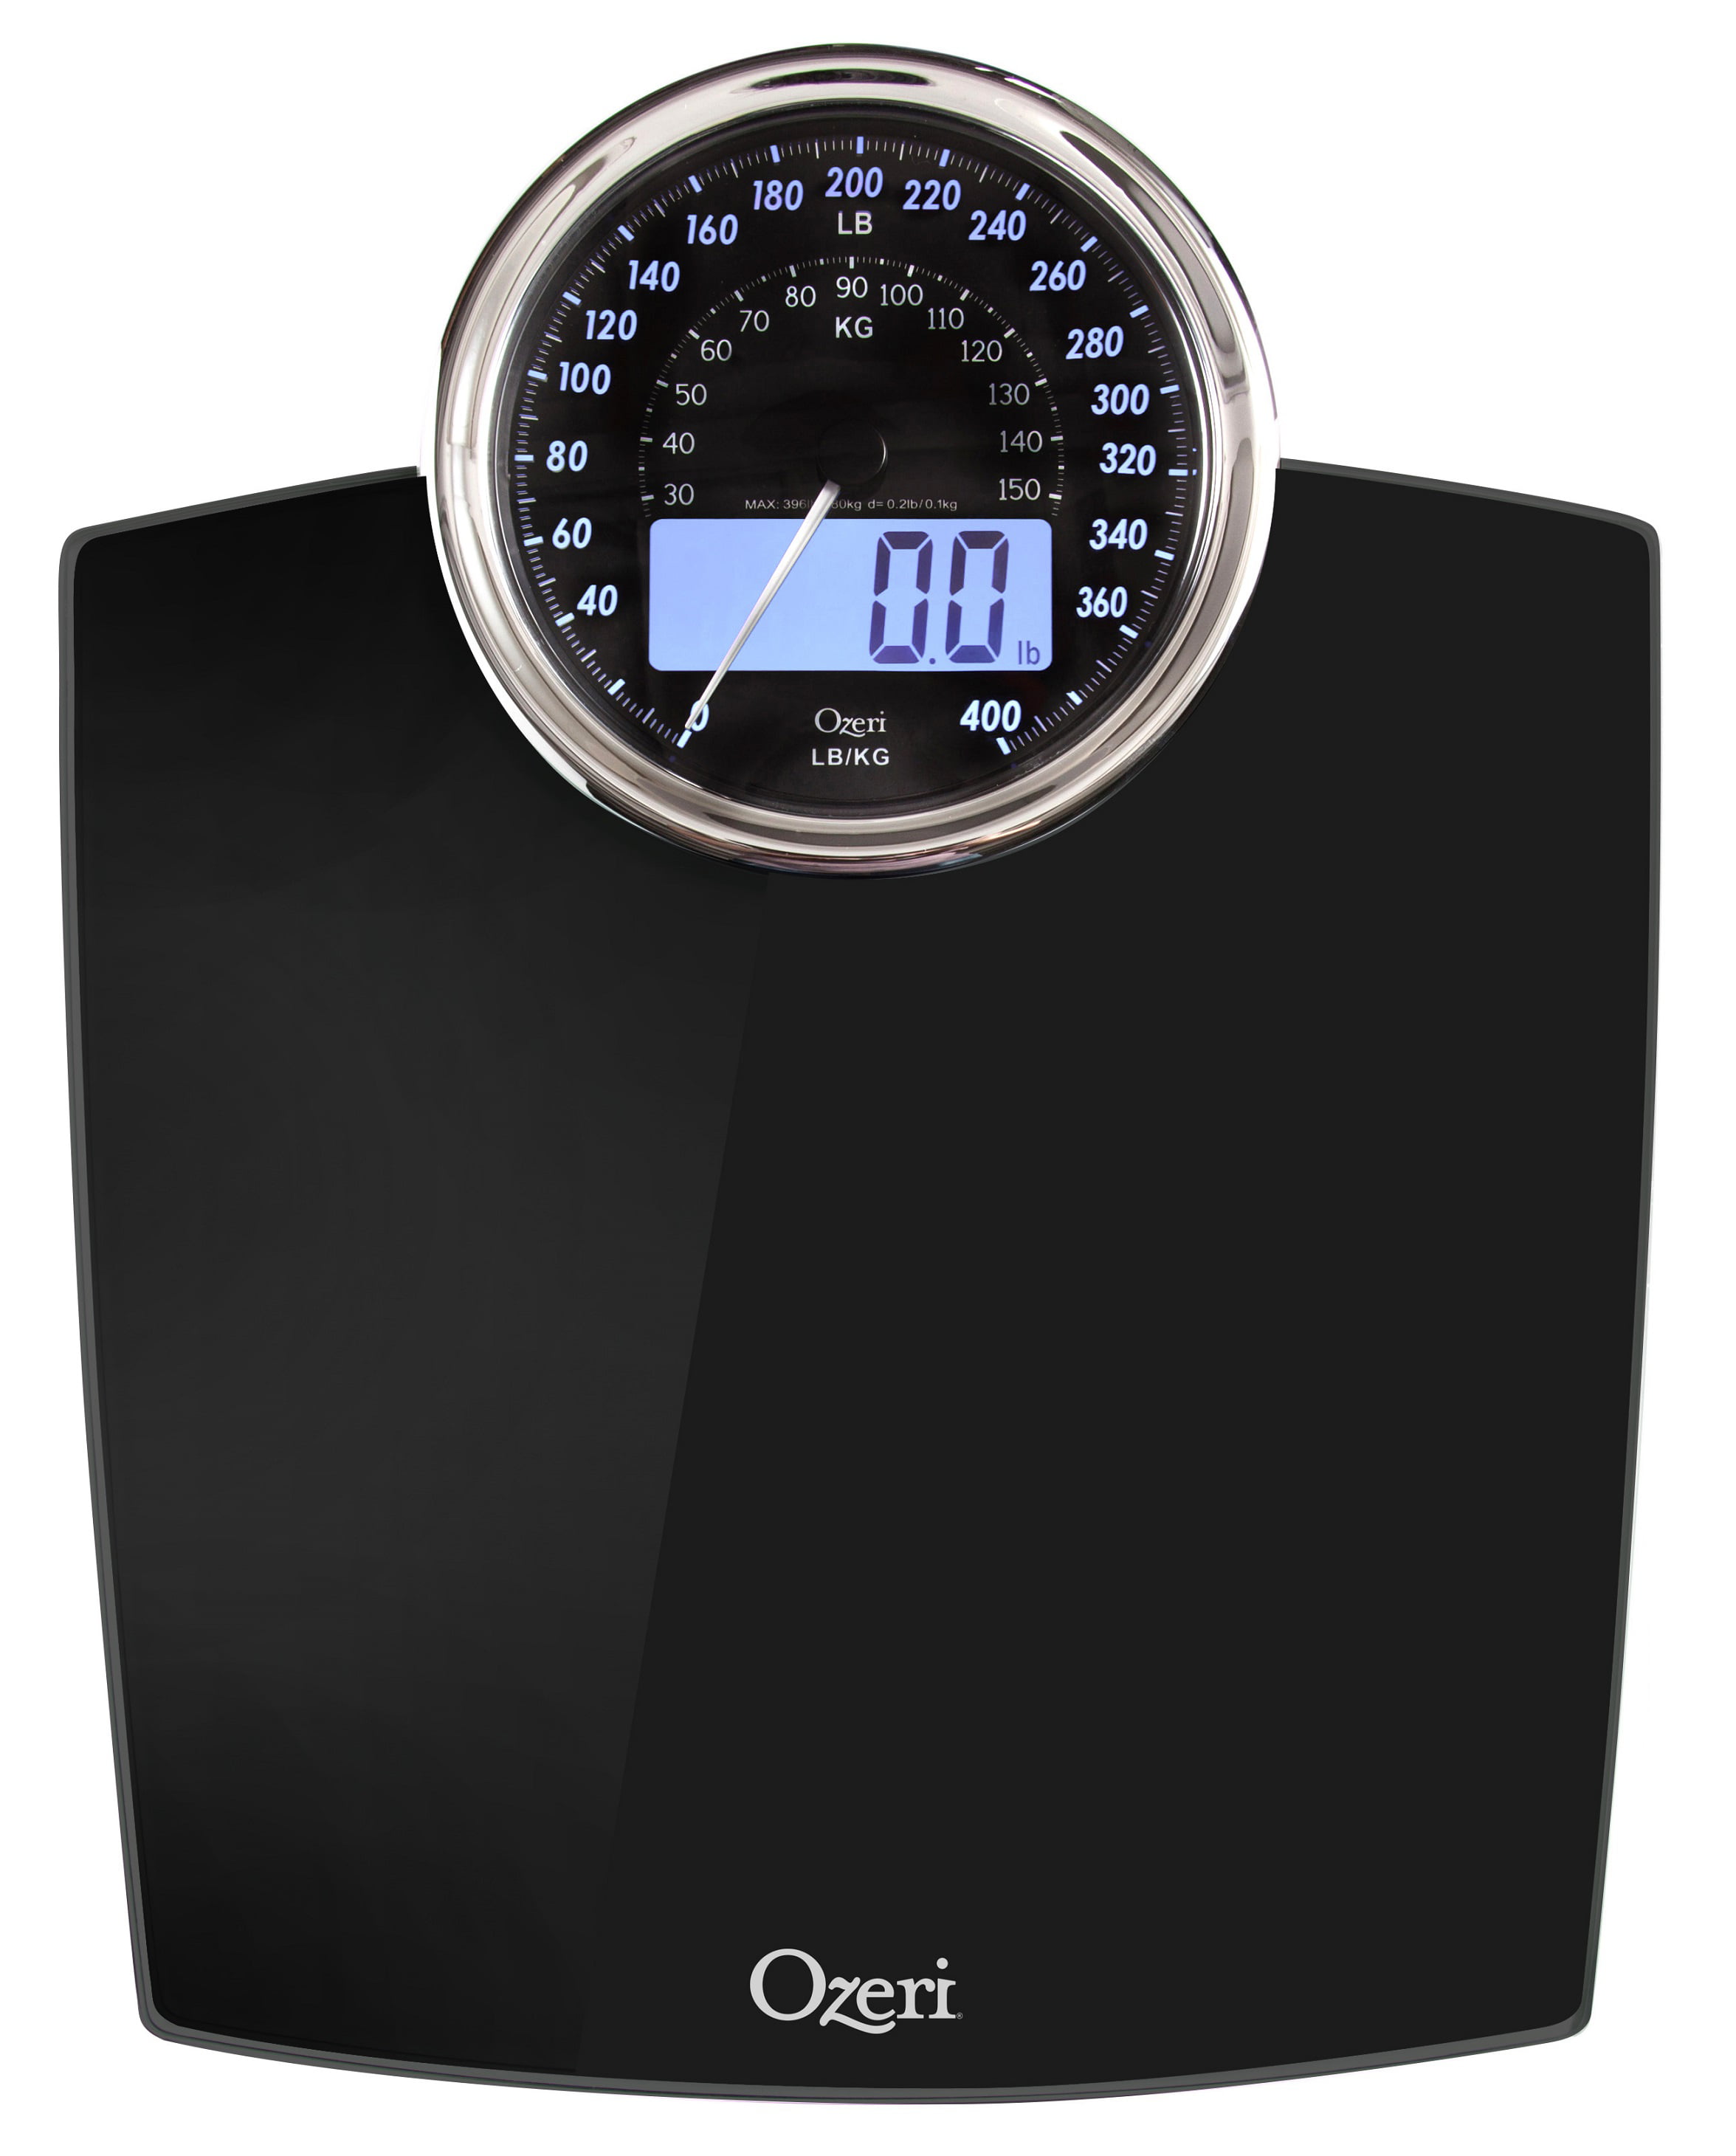 Electronic or Mechanical Bathroom Scales Body Measure Weight 180kg Digital 